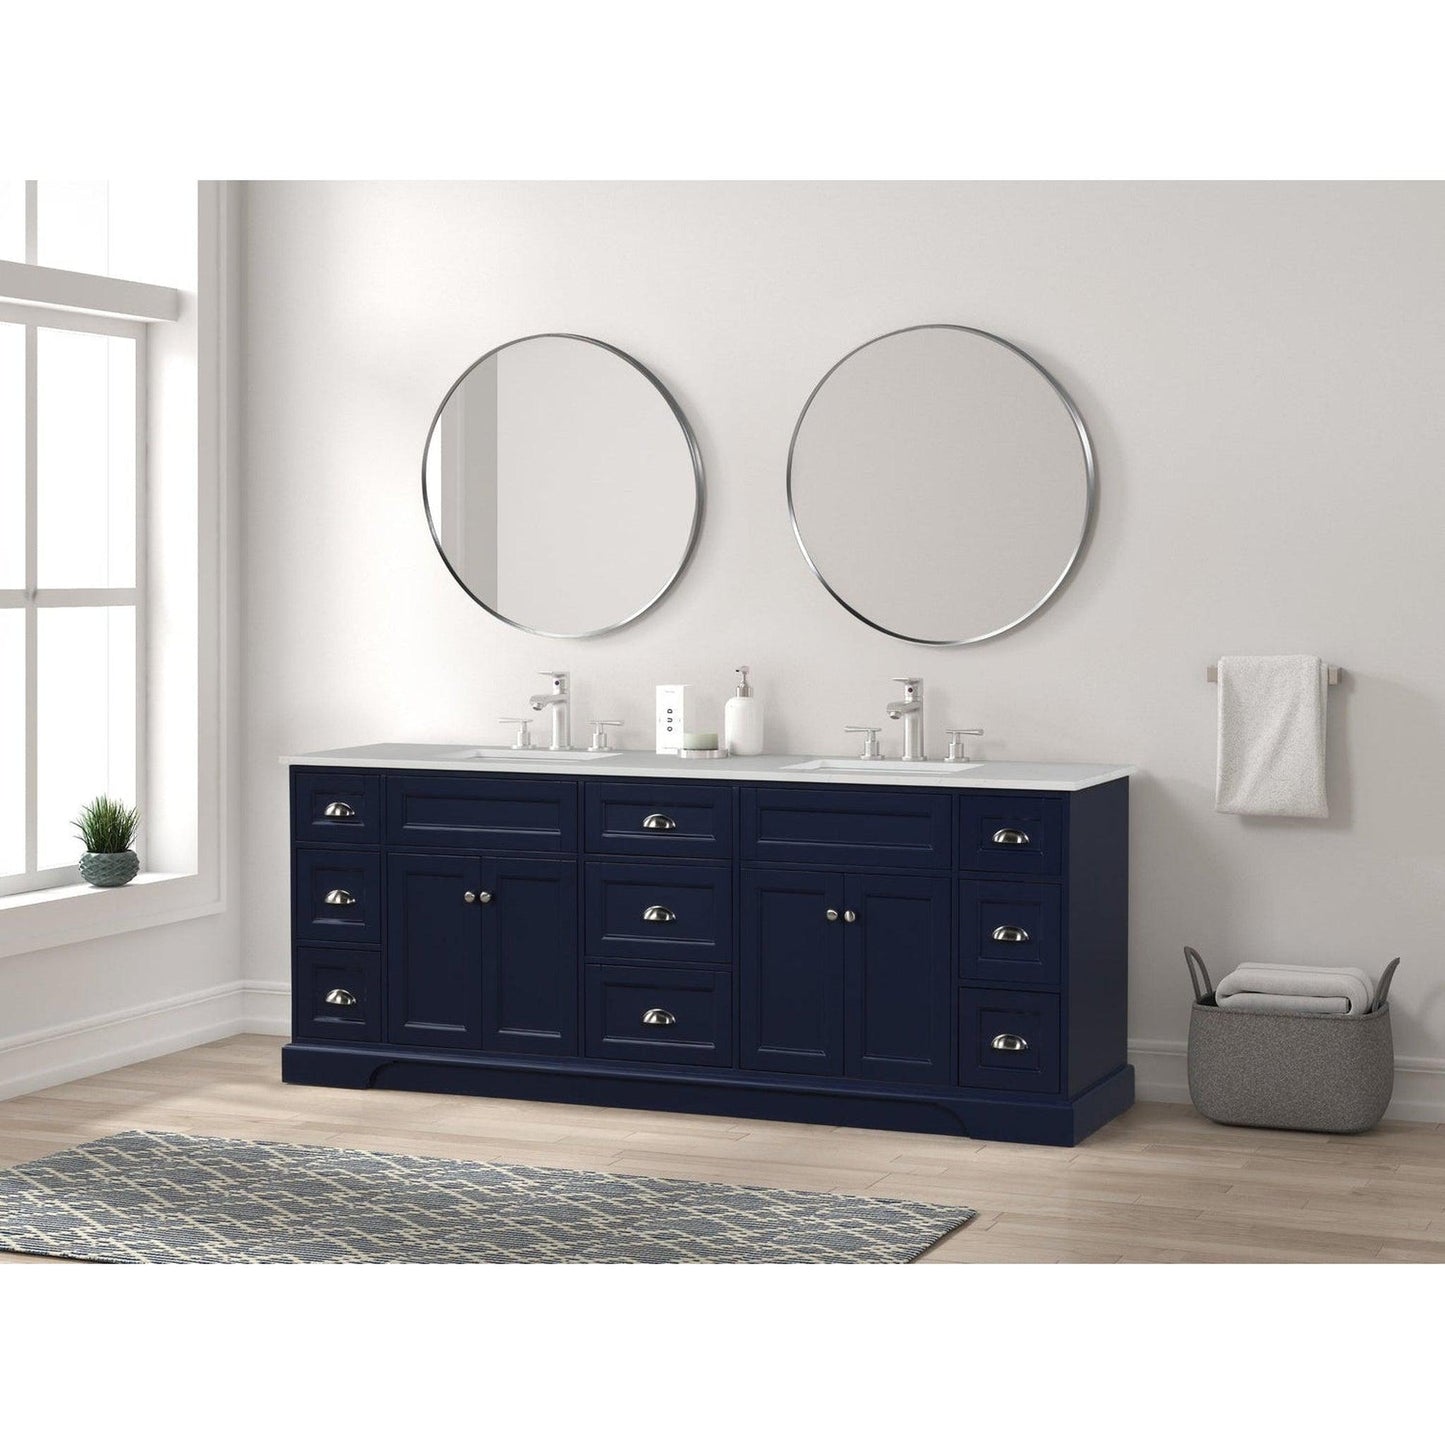 Eviva Epic 84" x 34" Blue Freestanding Bathroom Vanity With Brushed Nickel Hardware and Quartz Countertop With Double Undermount Sink